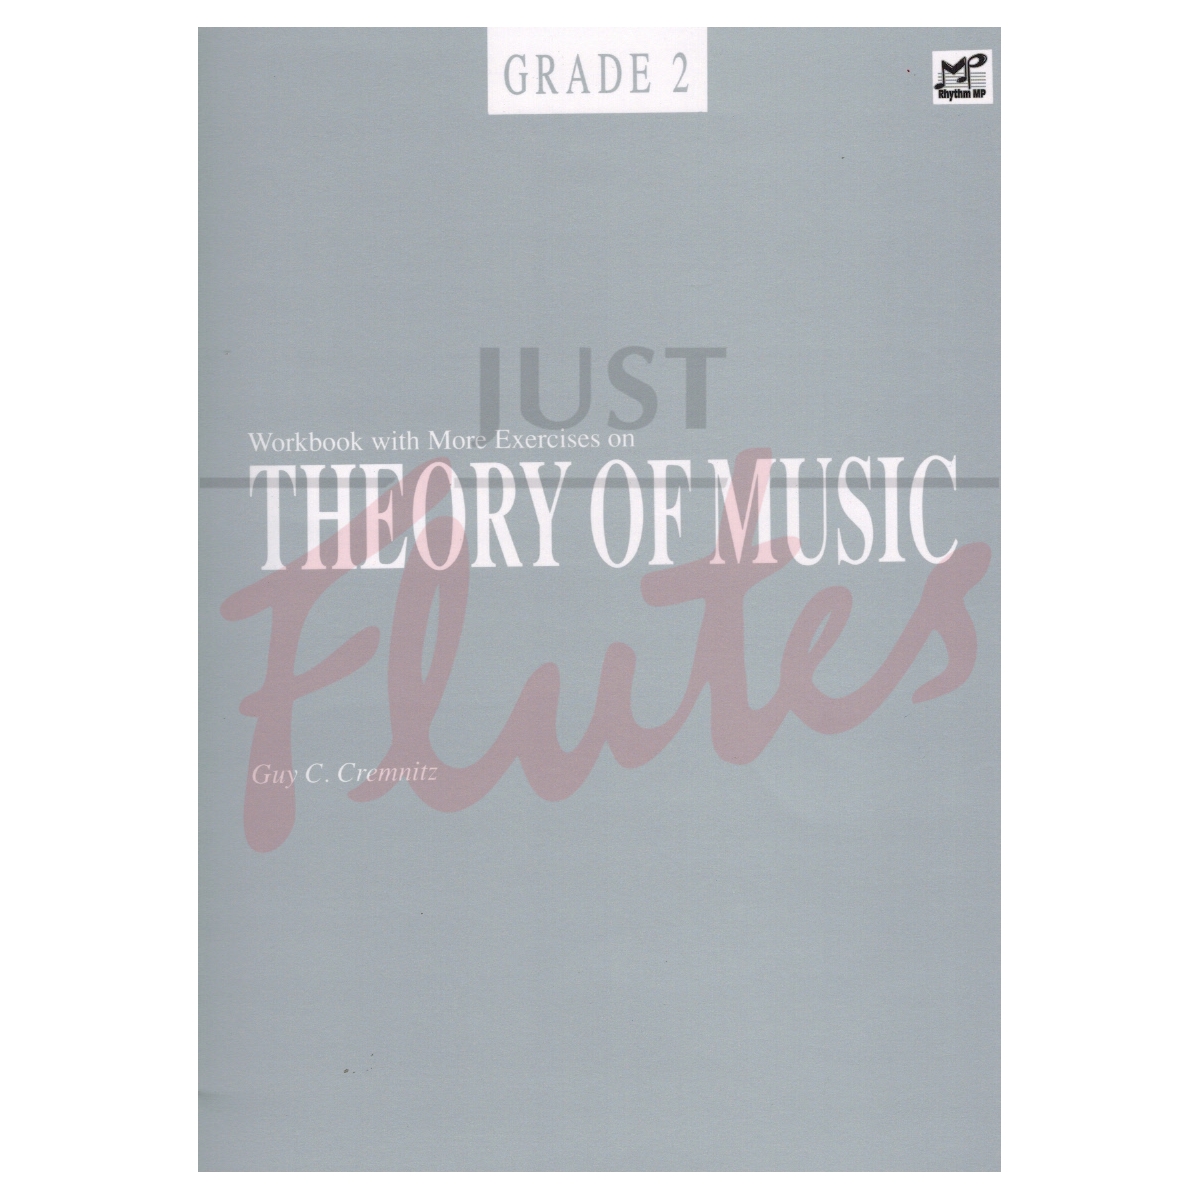 Workbook with More Exercises on Theory of Music Grade 2